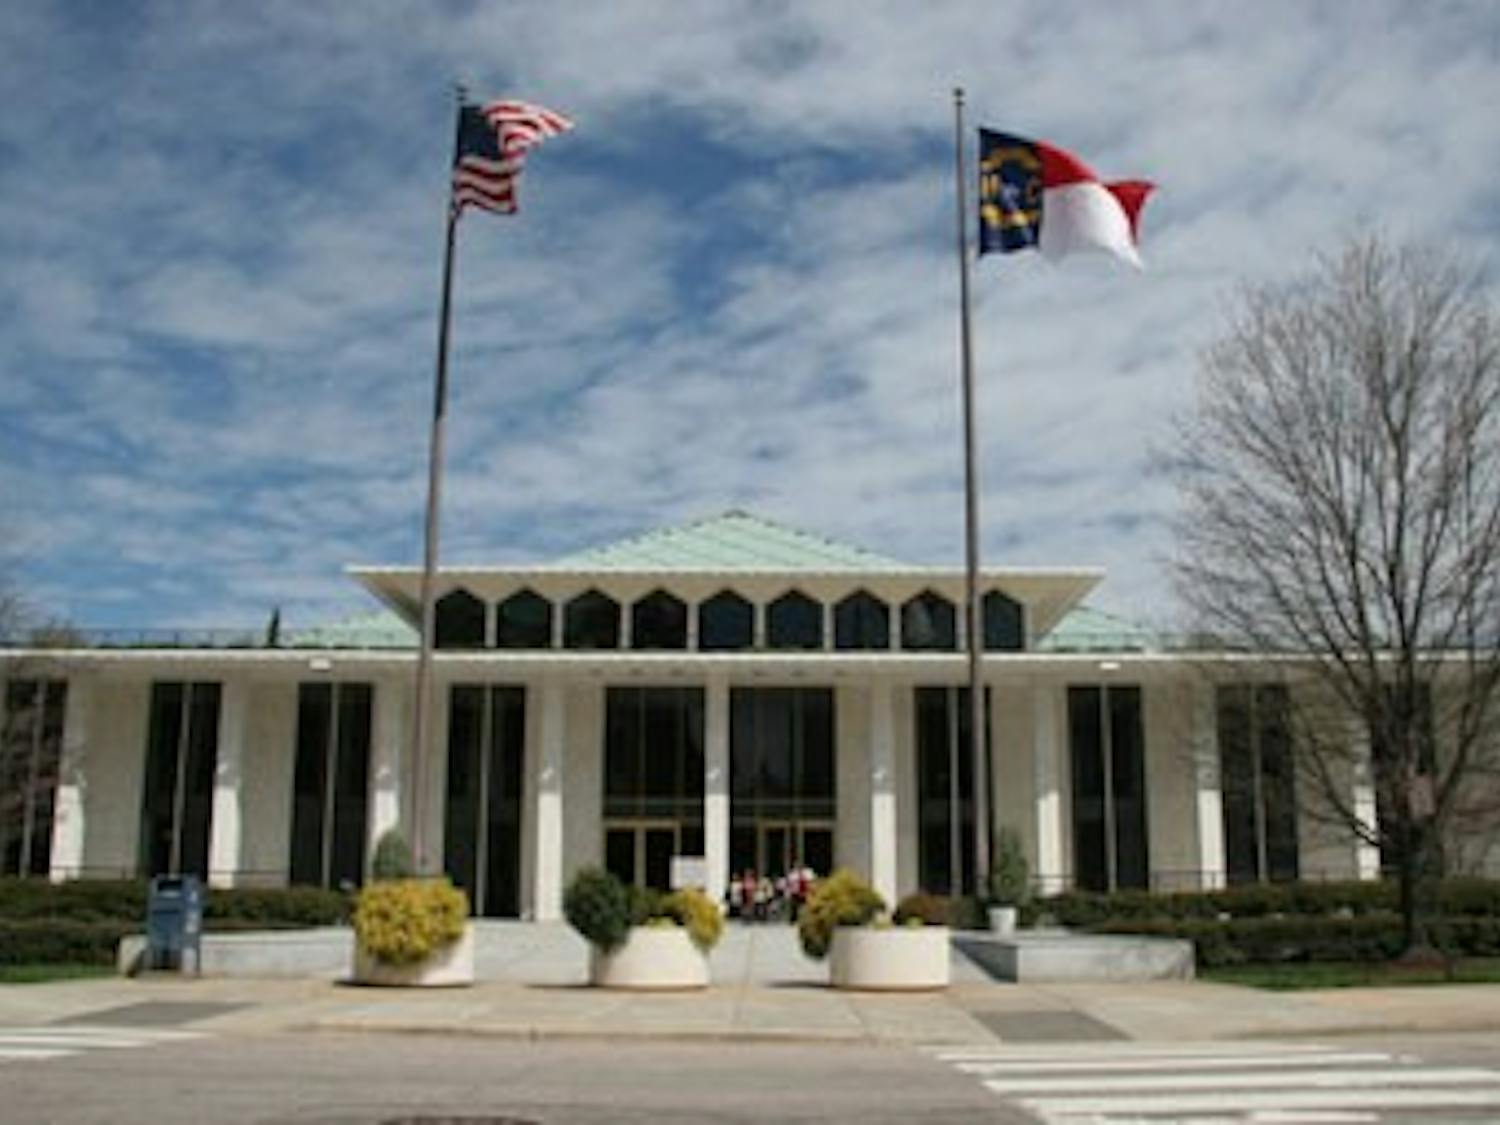 The Legislative Building located in Raleigh houses North Carolina's General Assembly.